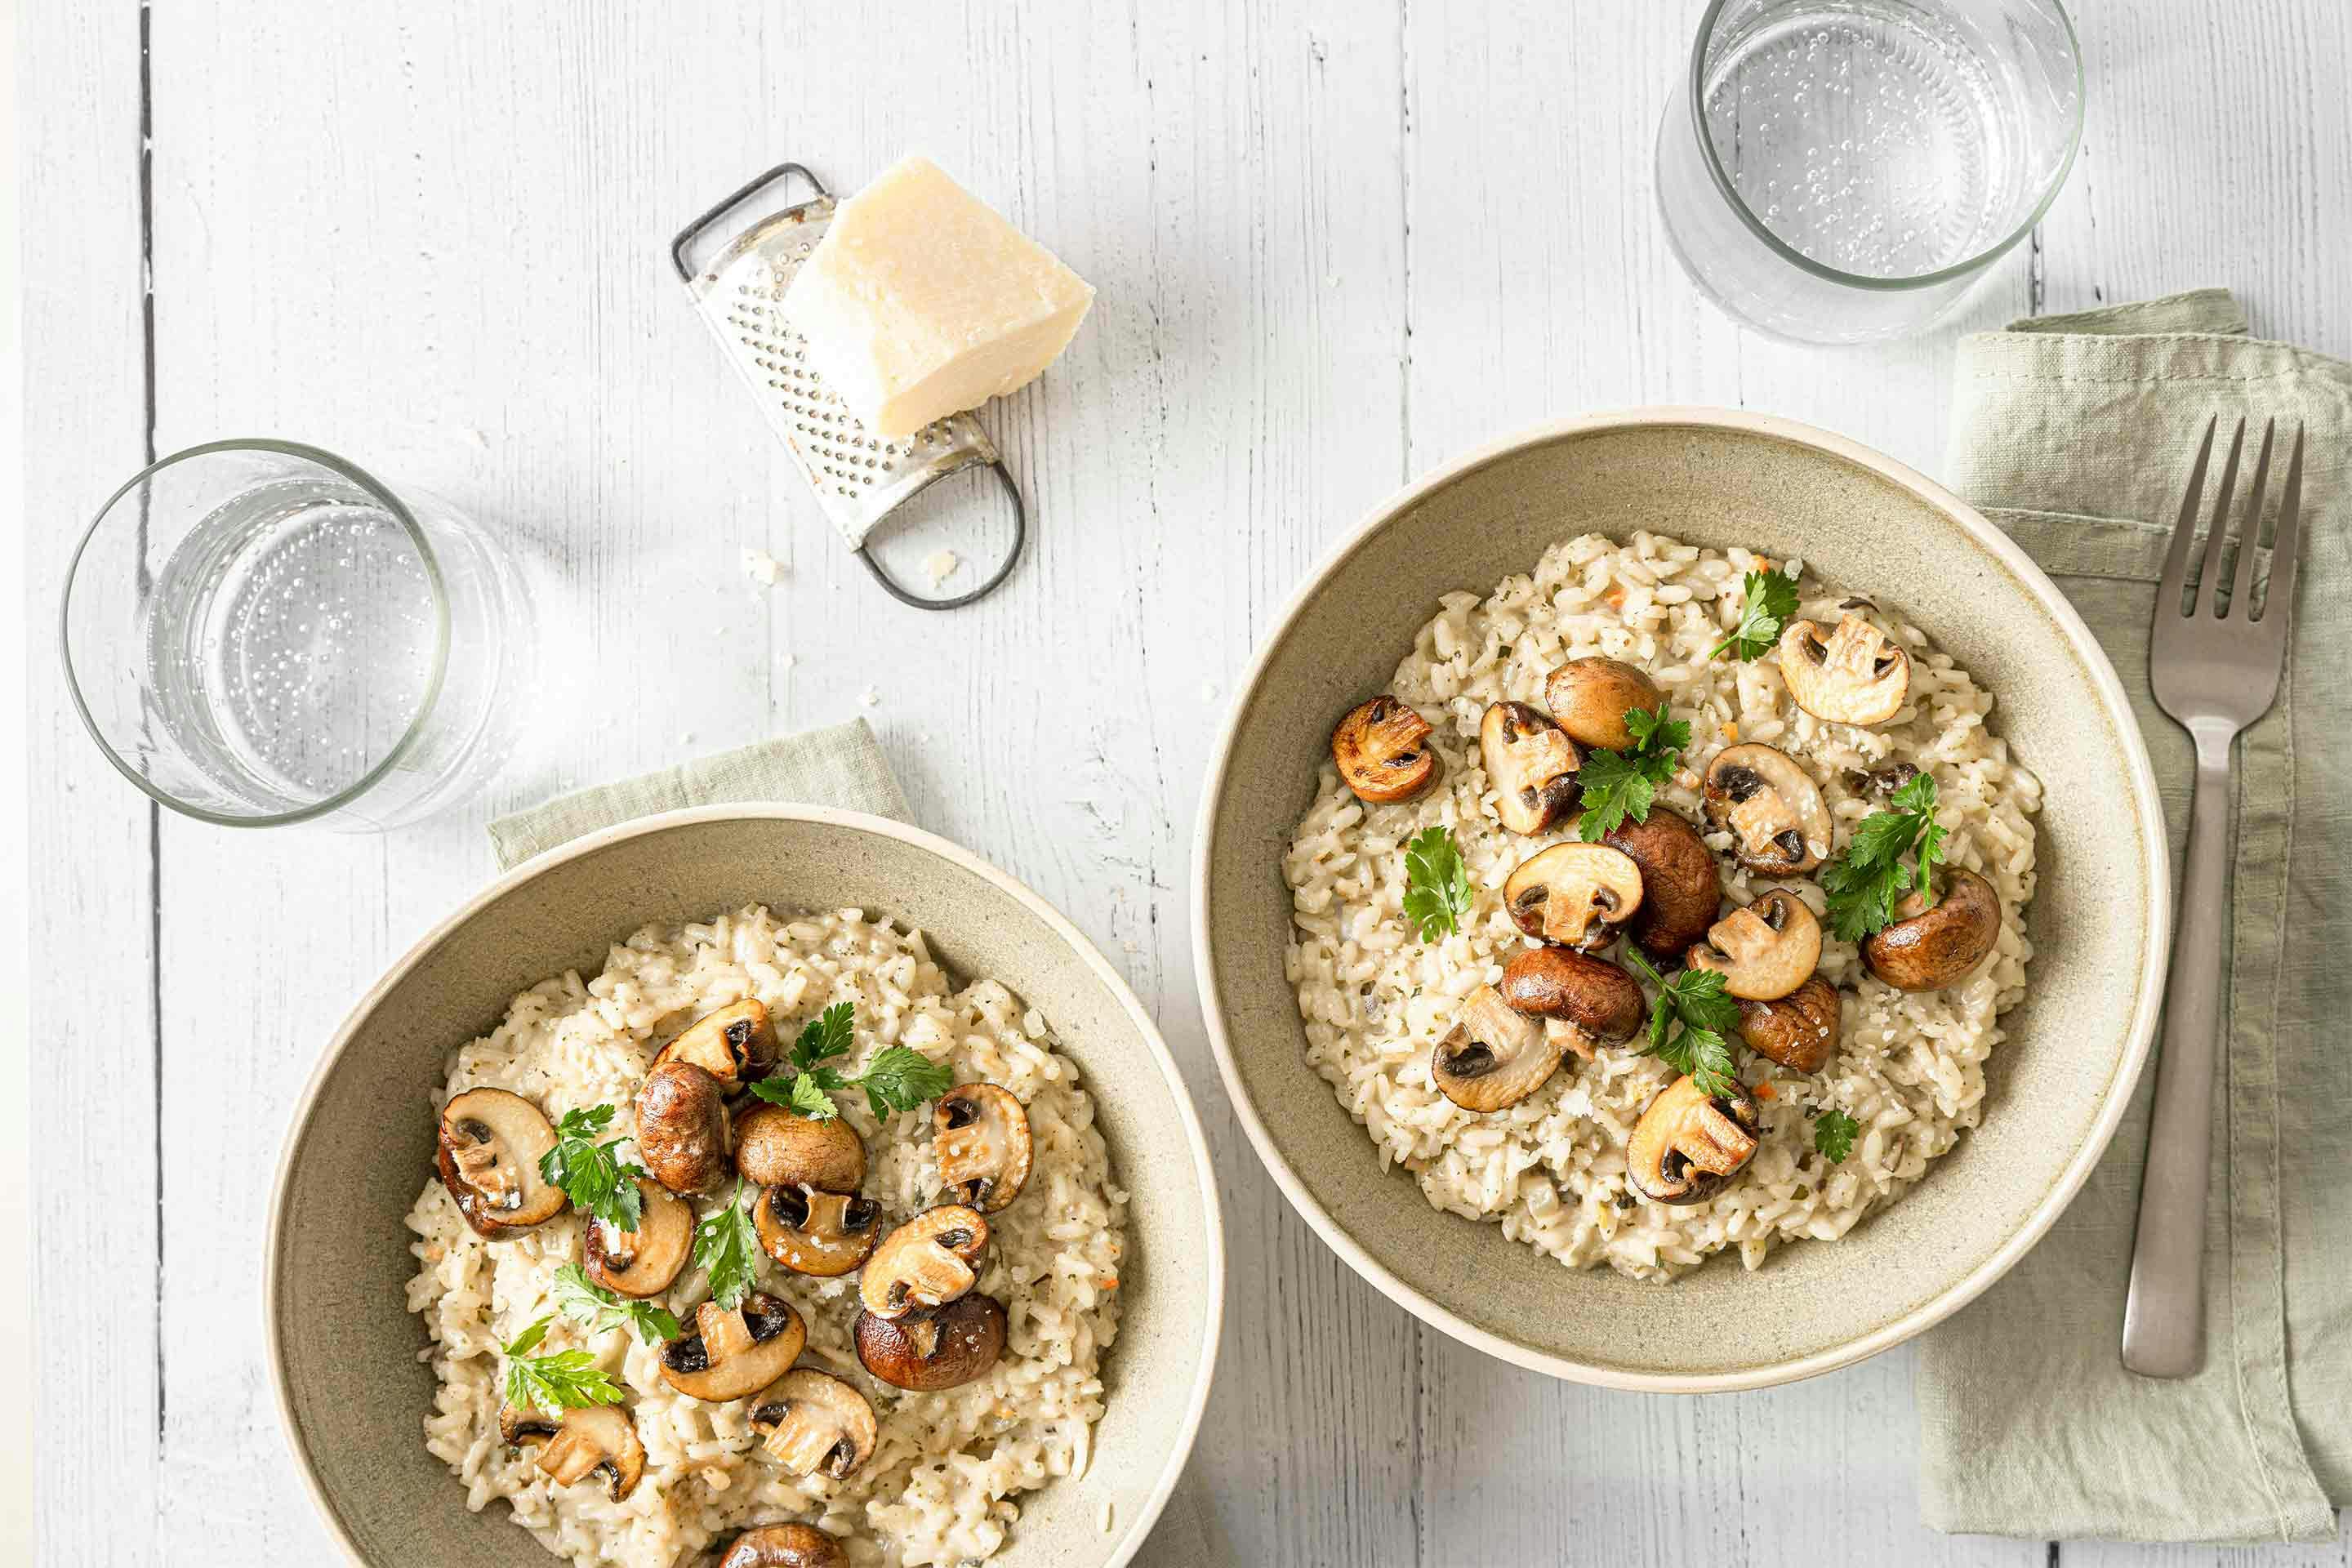 Two bowls of our mushroom risotto – delicious and done in no time.